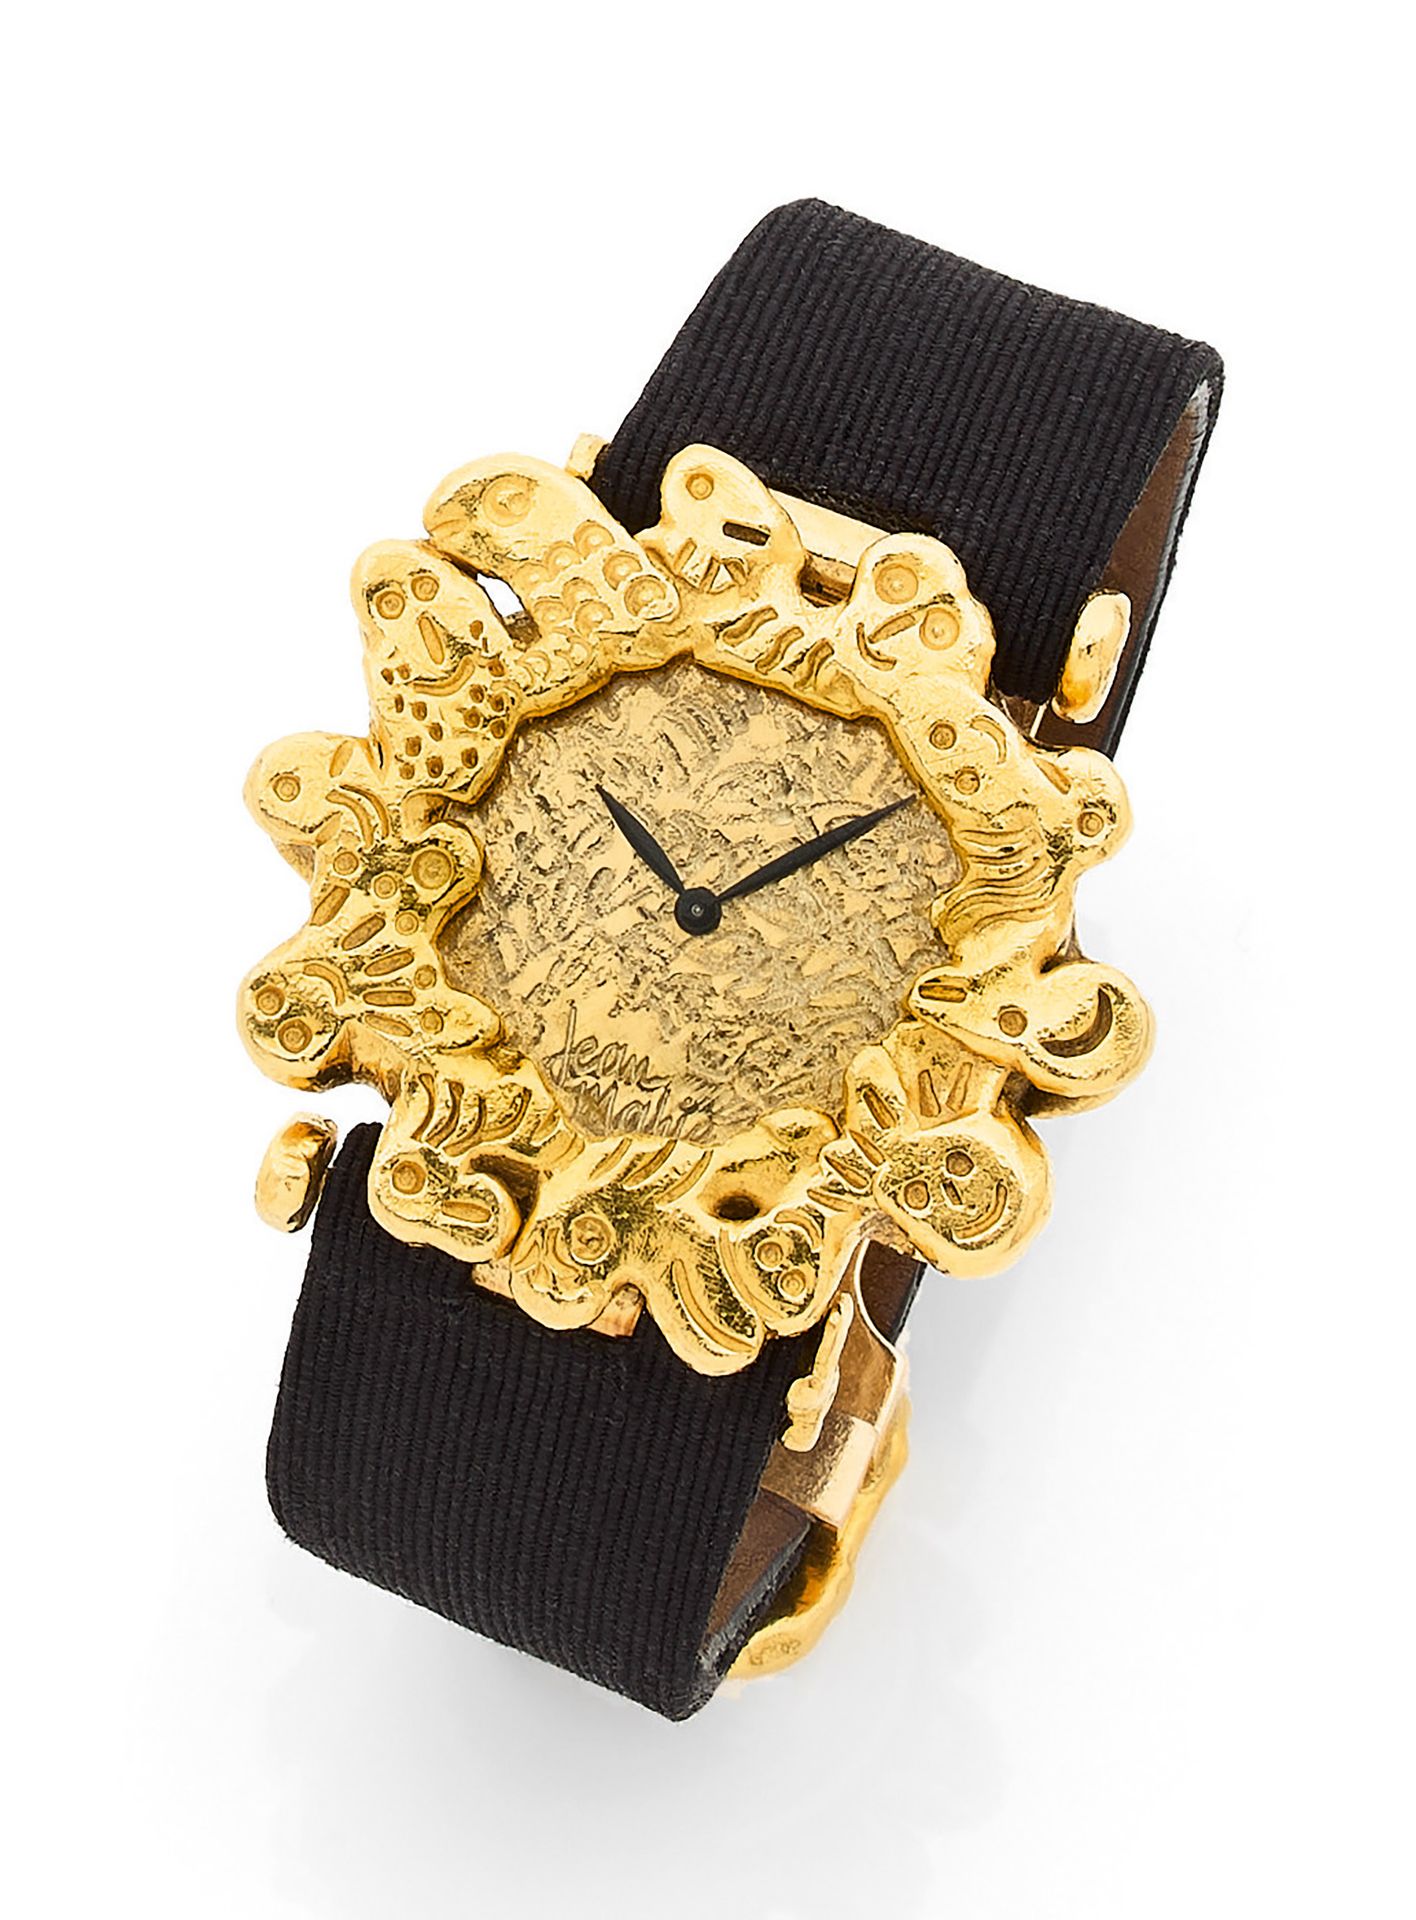 JEAN MAHIÉ JEAN MAHIÉ
Ladies' wristwatch in 18K (750) gold, the dial decorated w&hellip;